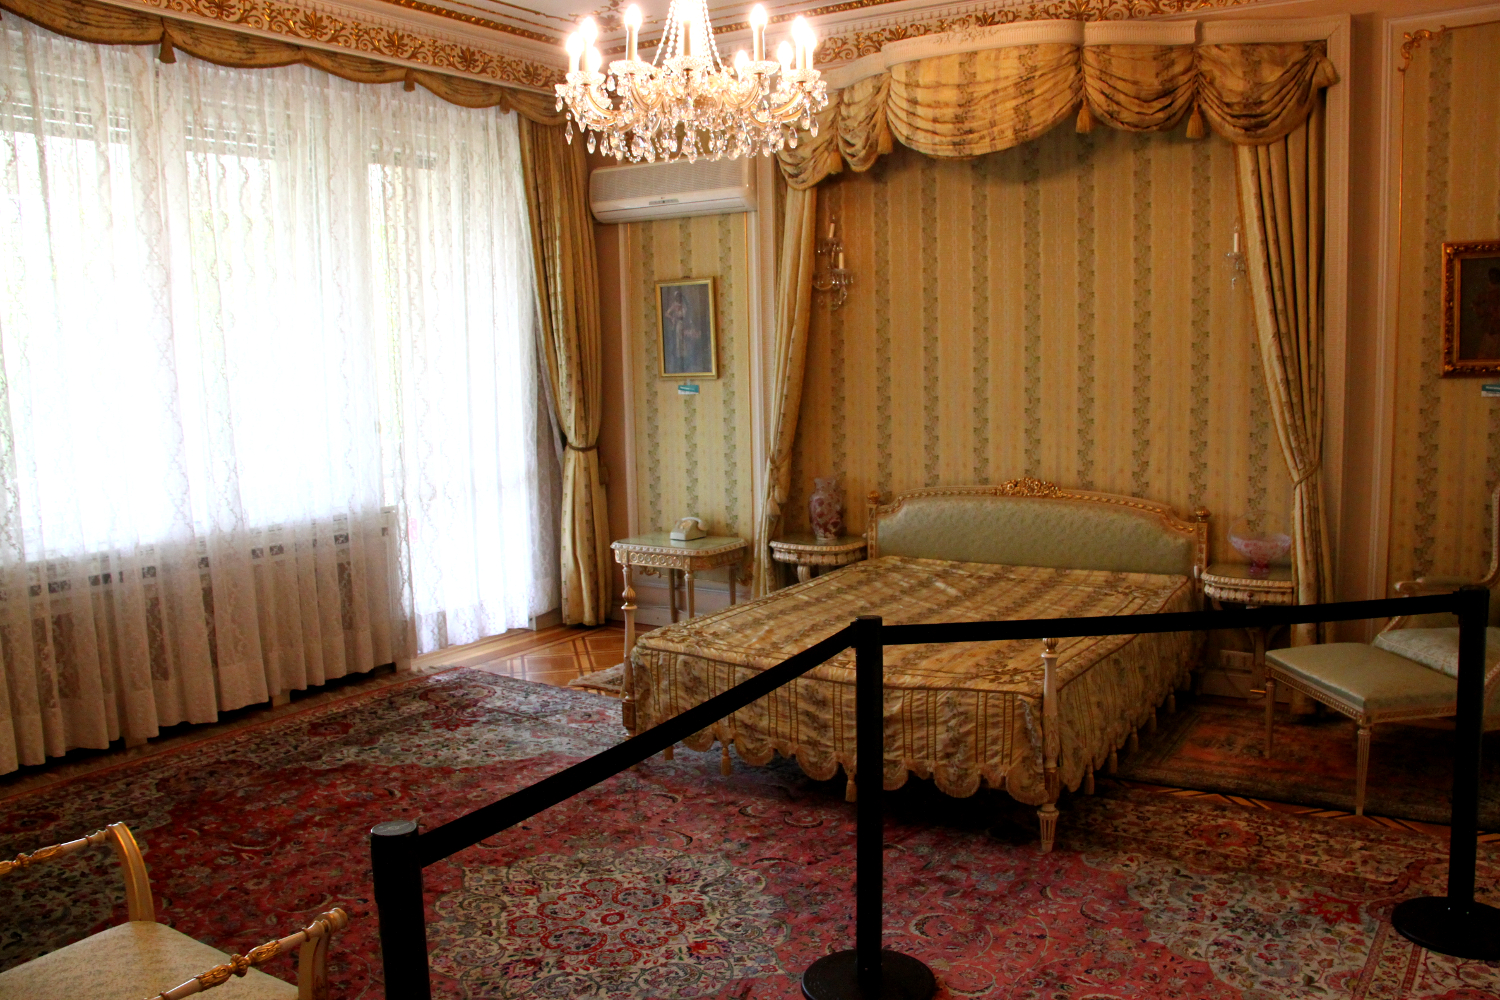 Primaverii (Spring) Palace, Ceausescu’s private residence - Zoe Ceausescu's bedroom